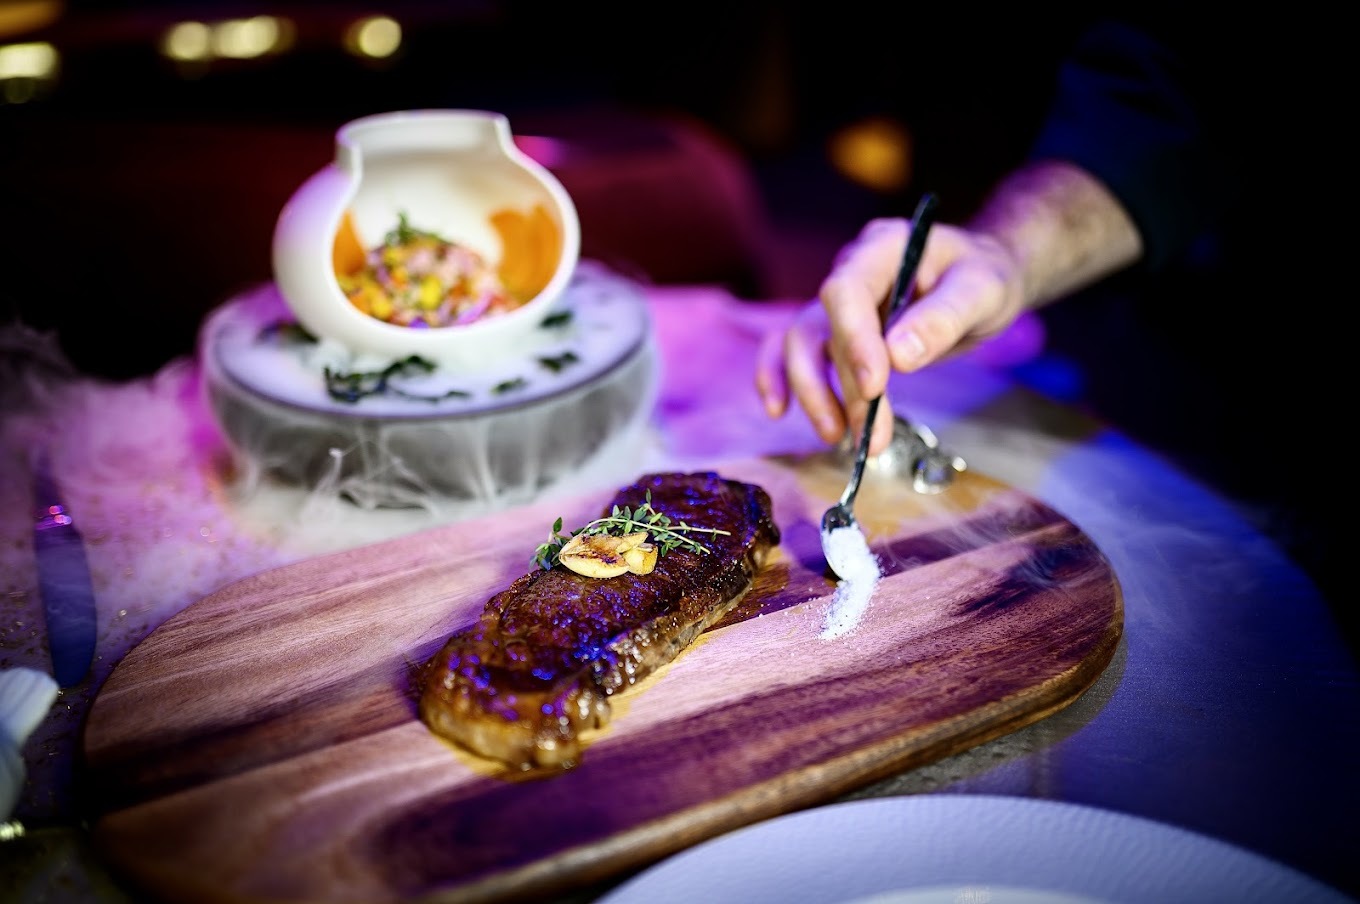 steak on a wooden plate with ceviche in a white bowl behind